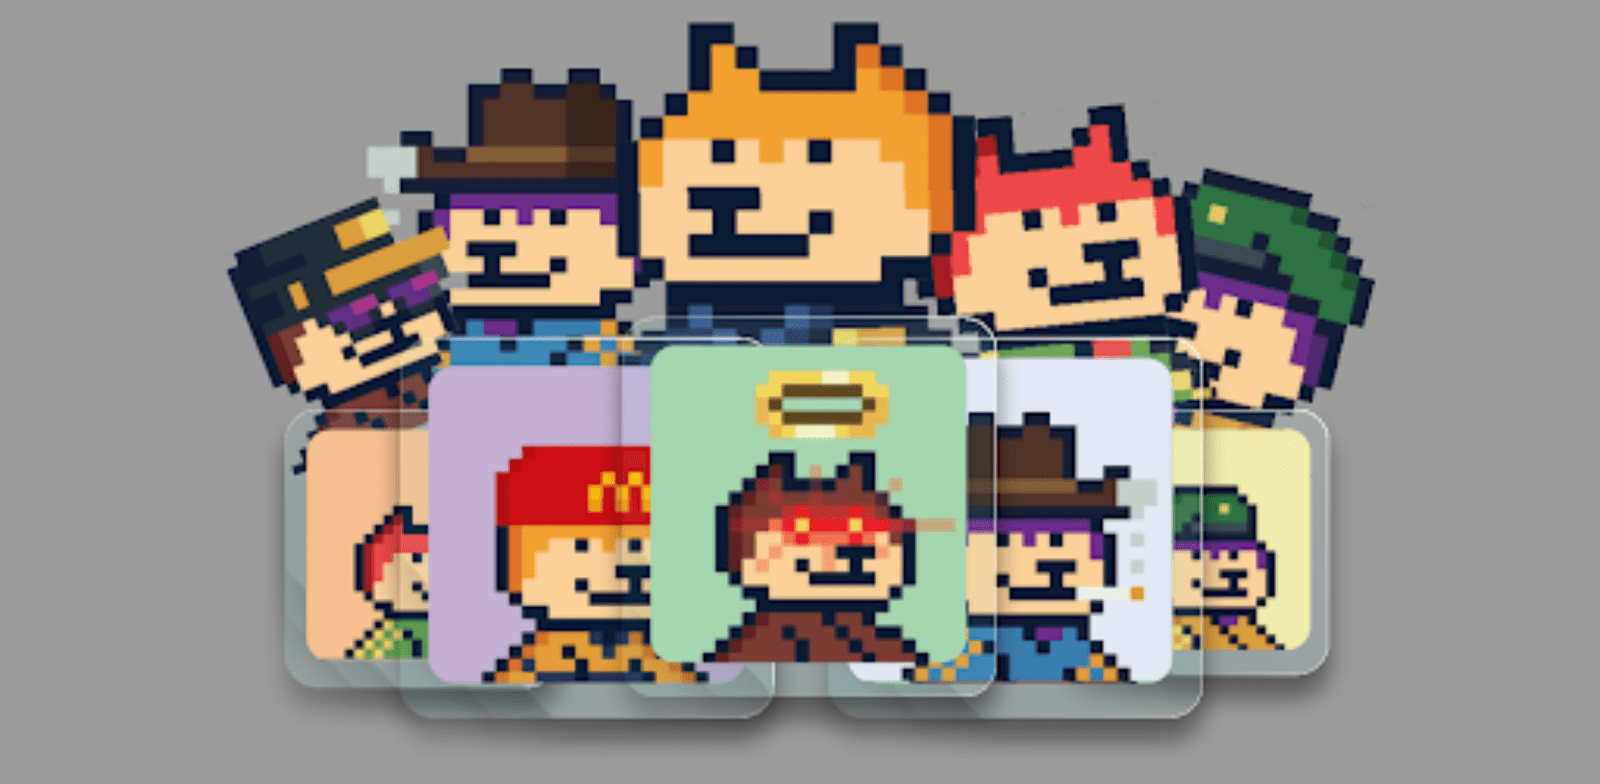 Doge Capital Is A Solana-Based Nft Collection Consisting Of 5000 Charming 24×24 Pixel Dogs.